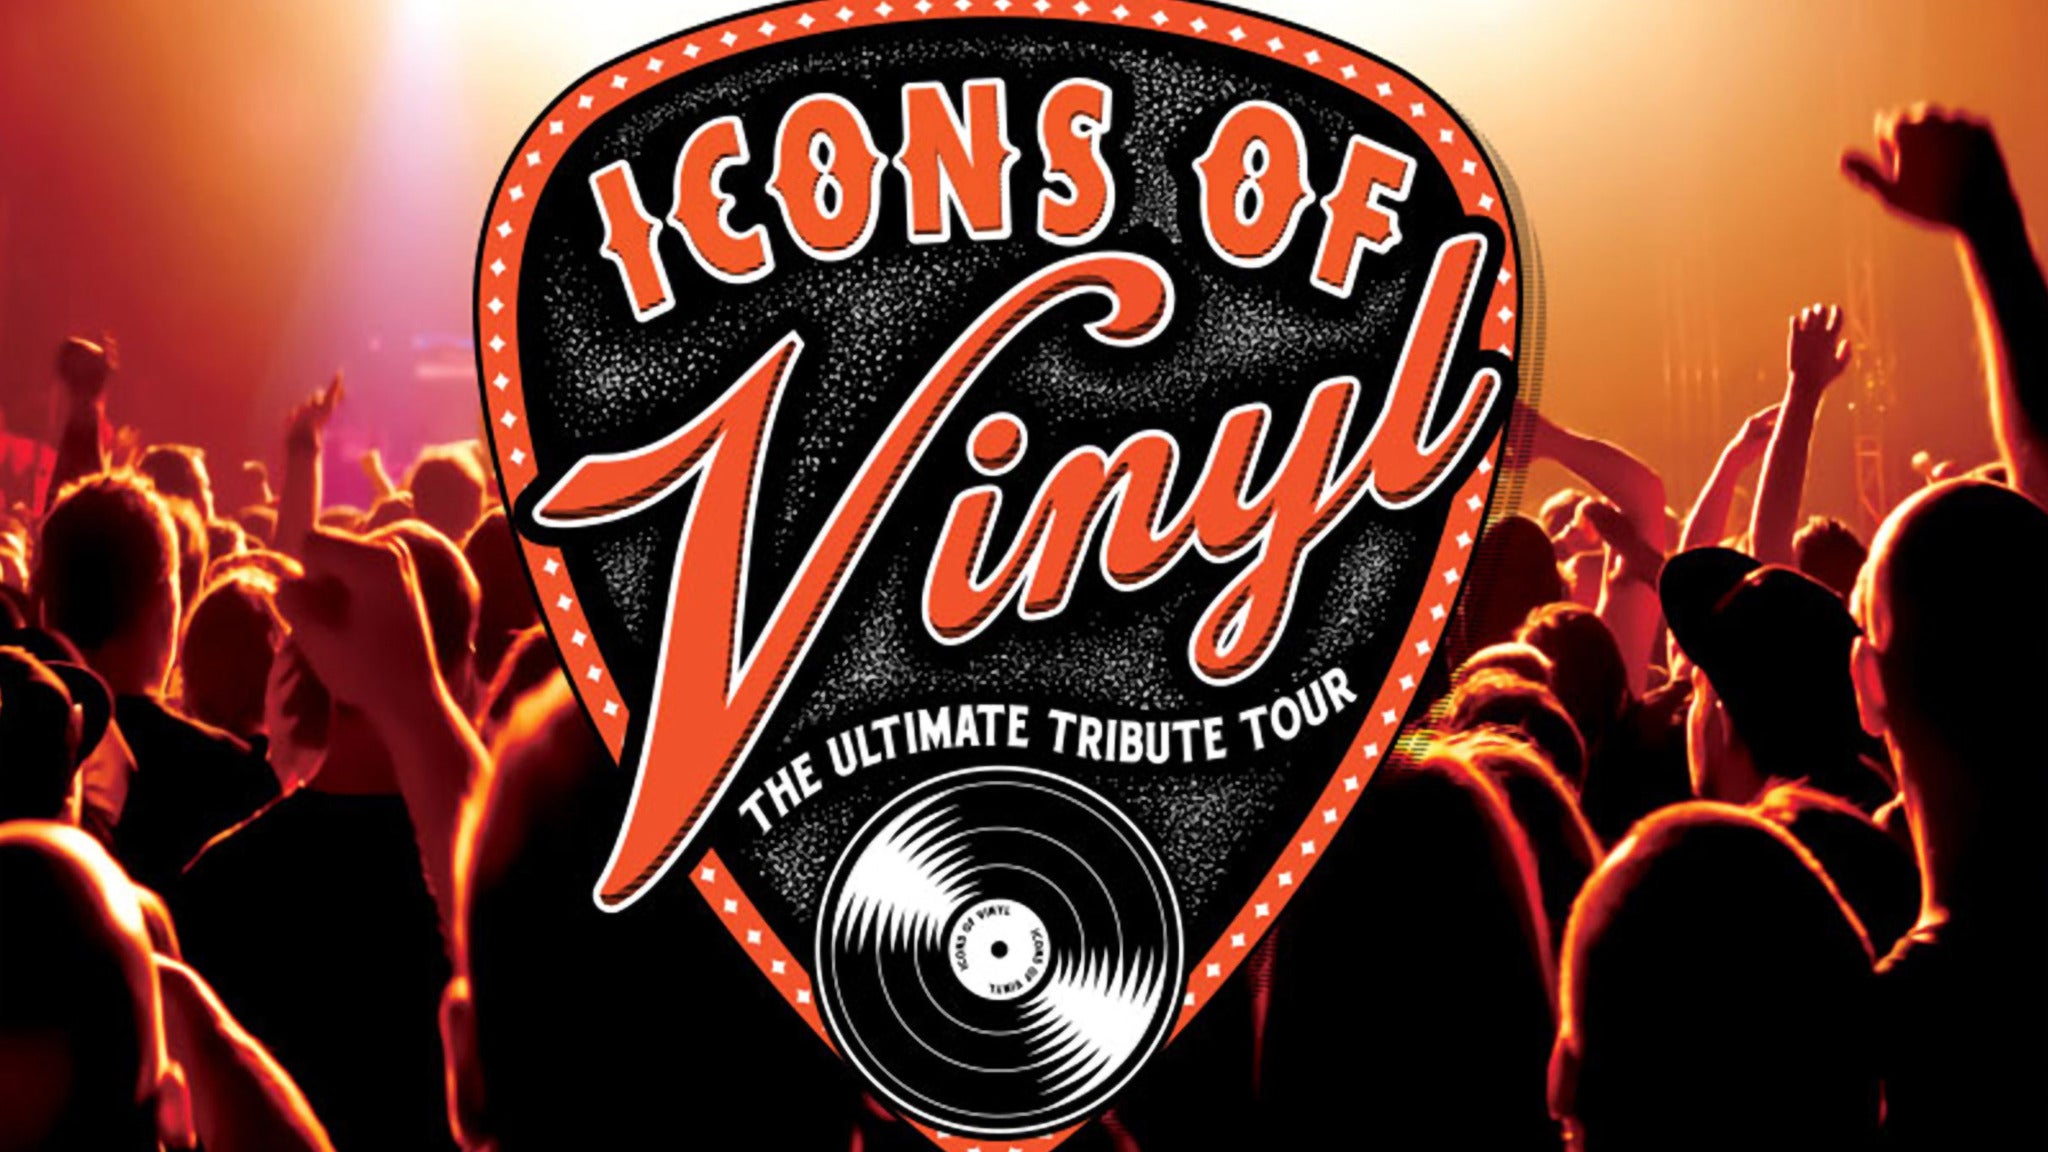 Icons Of Vinyl: Featuring Tributes To Steely Dan, Tom Petty, & More in Huntington event information